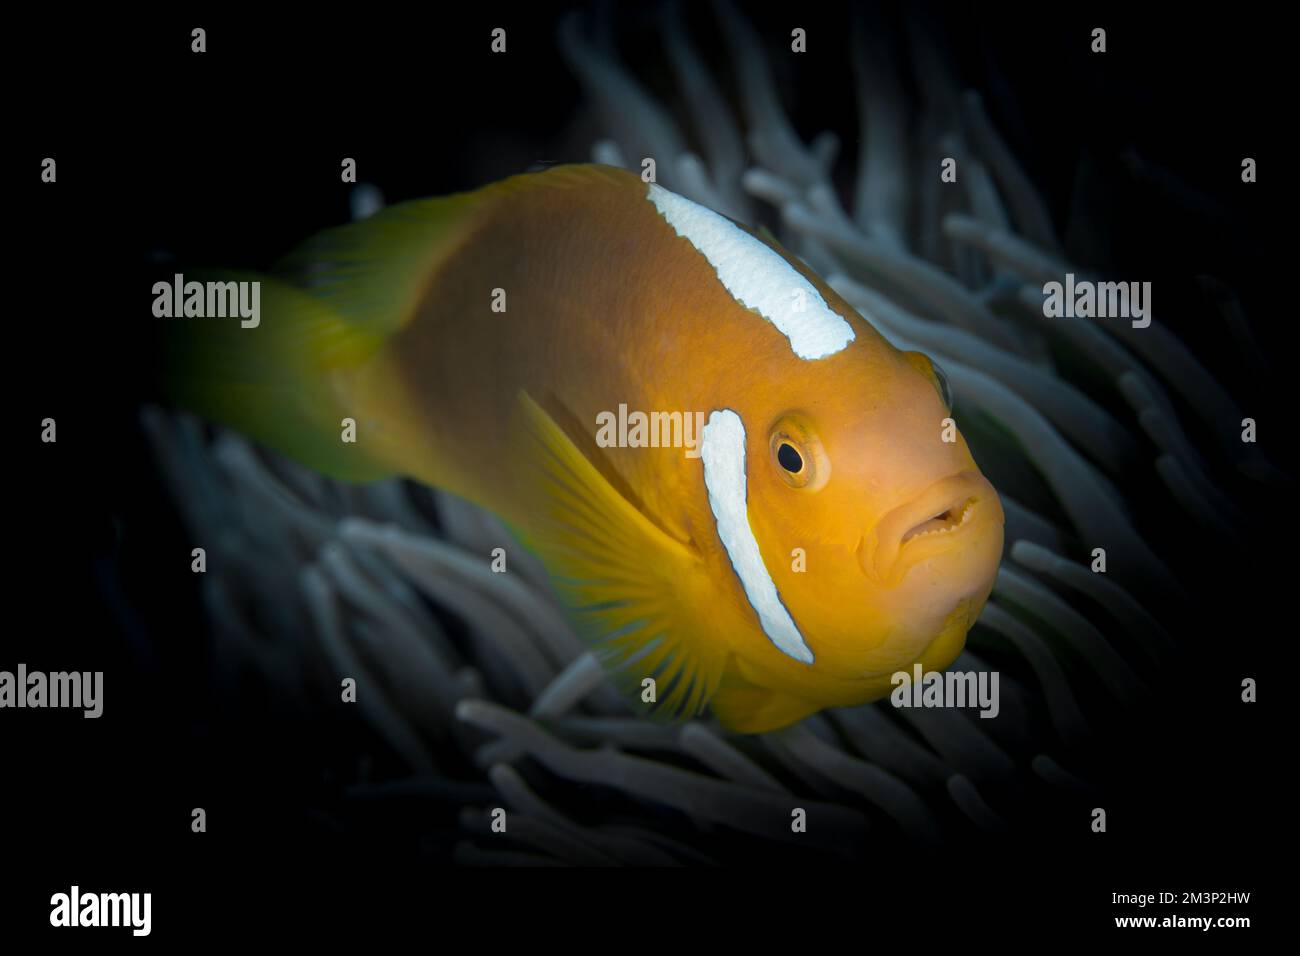 White bonnet clownfish in Papua - Rare hybrid species anemonefish found in the south pacific Stock Photo